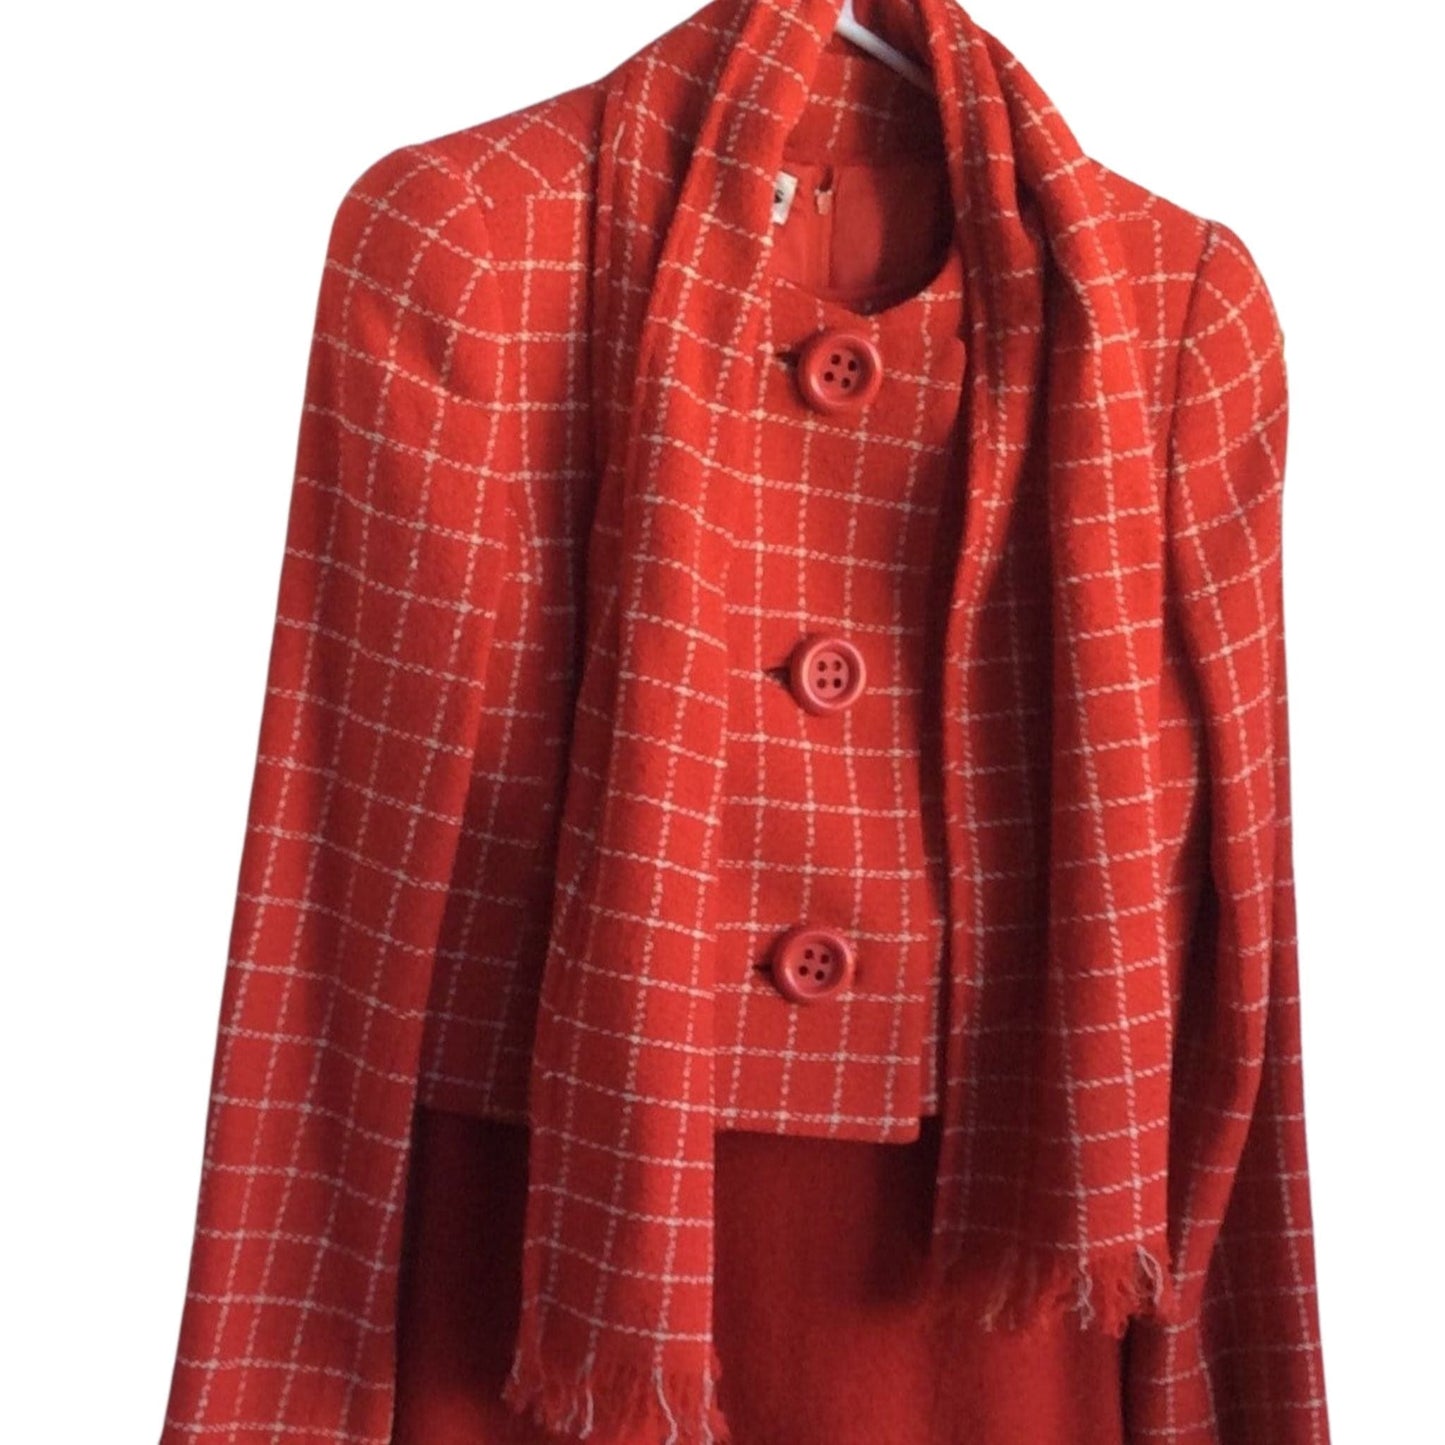 David Hayes Dress Outfit Medium / Red / Vintage 1980s